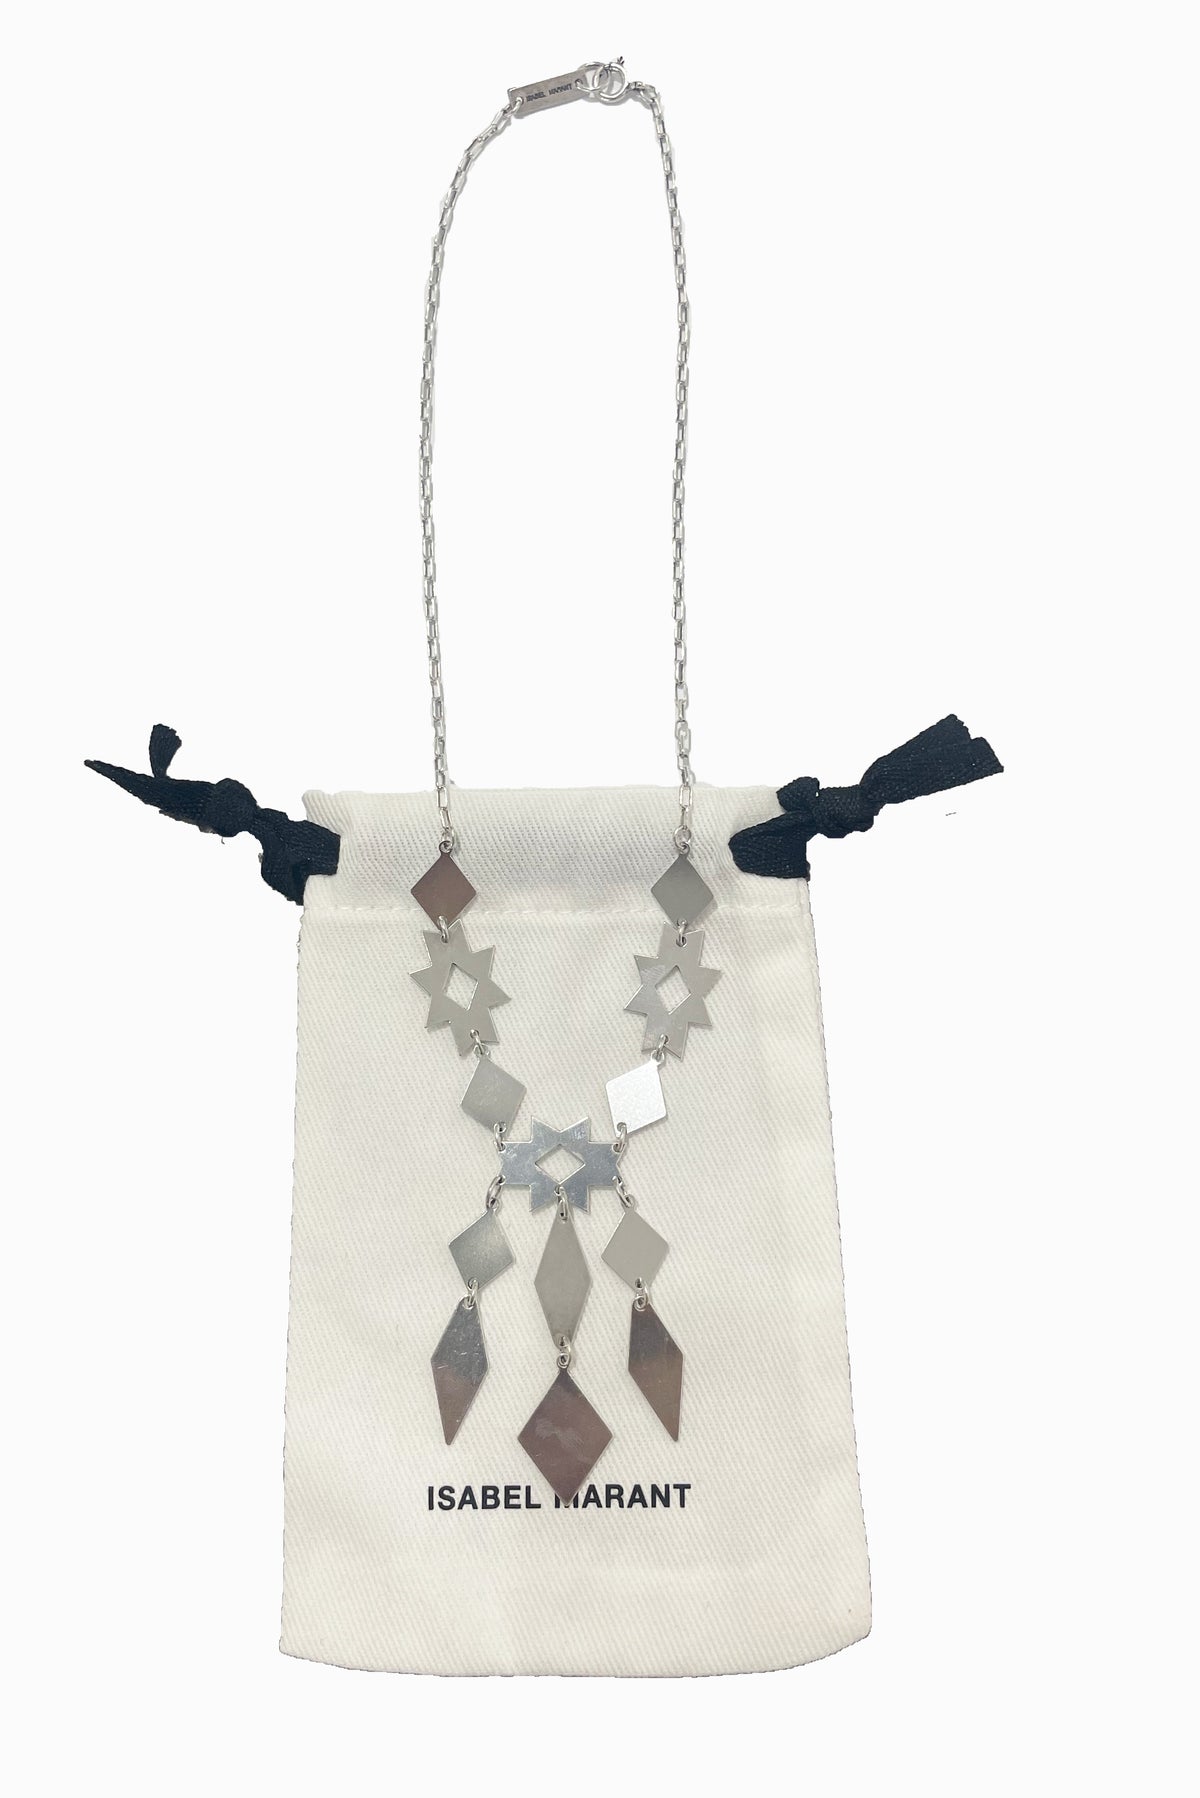 Isabel Marant My Love Necklace